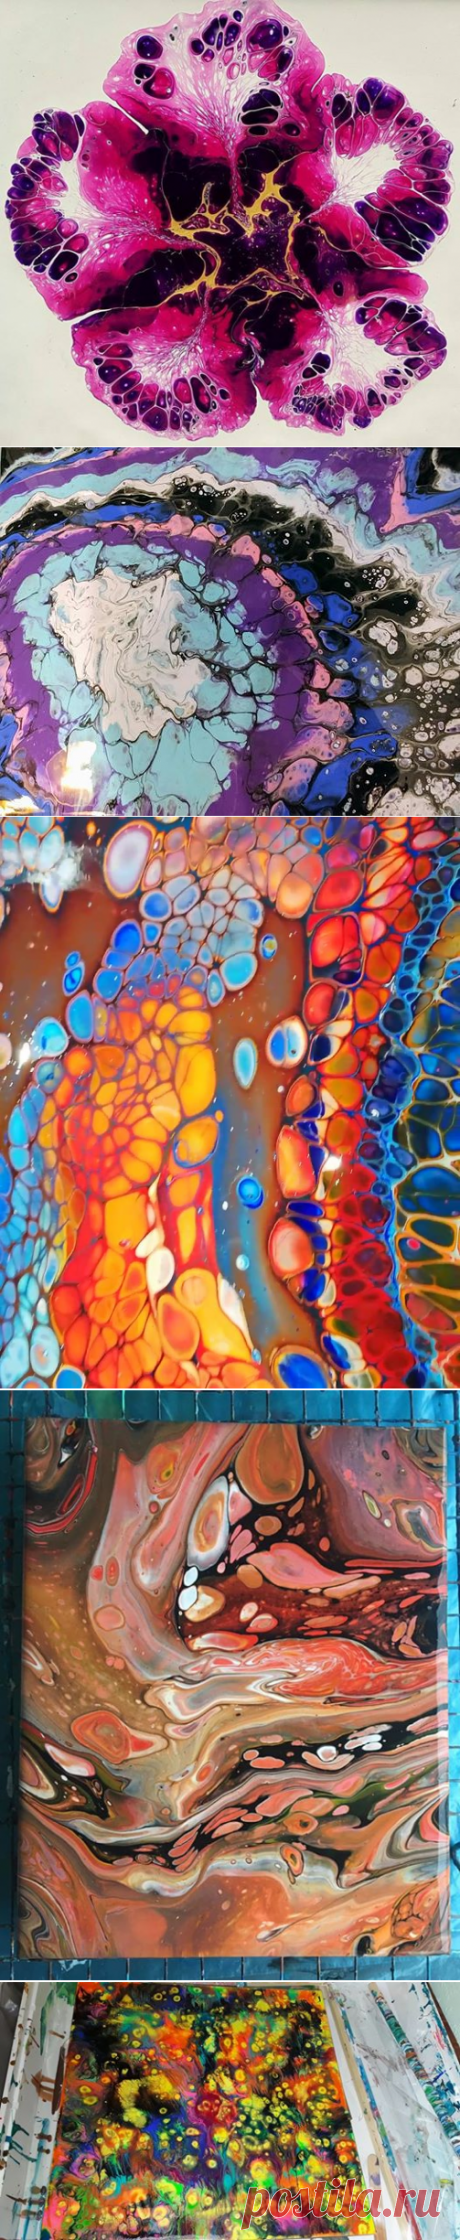 (2) Acrylic Pouring